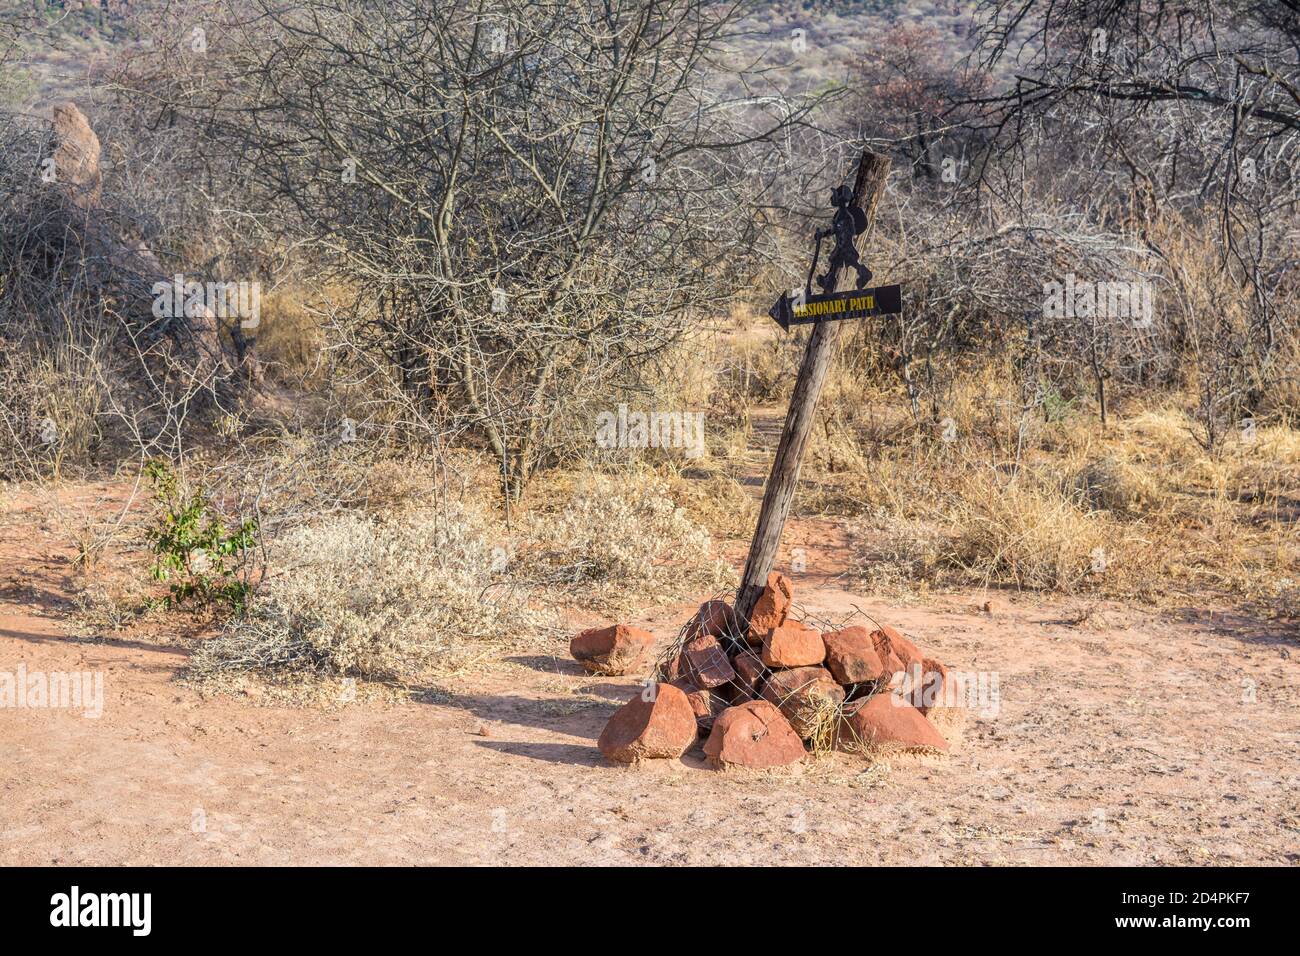 Missionary path sign in waterberg, History Path,  Namibia, Africa Stock Photo